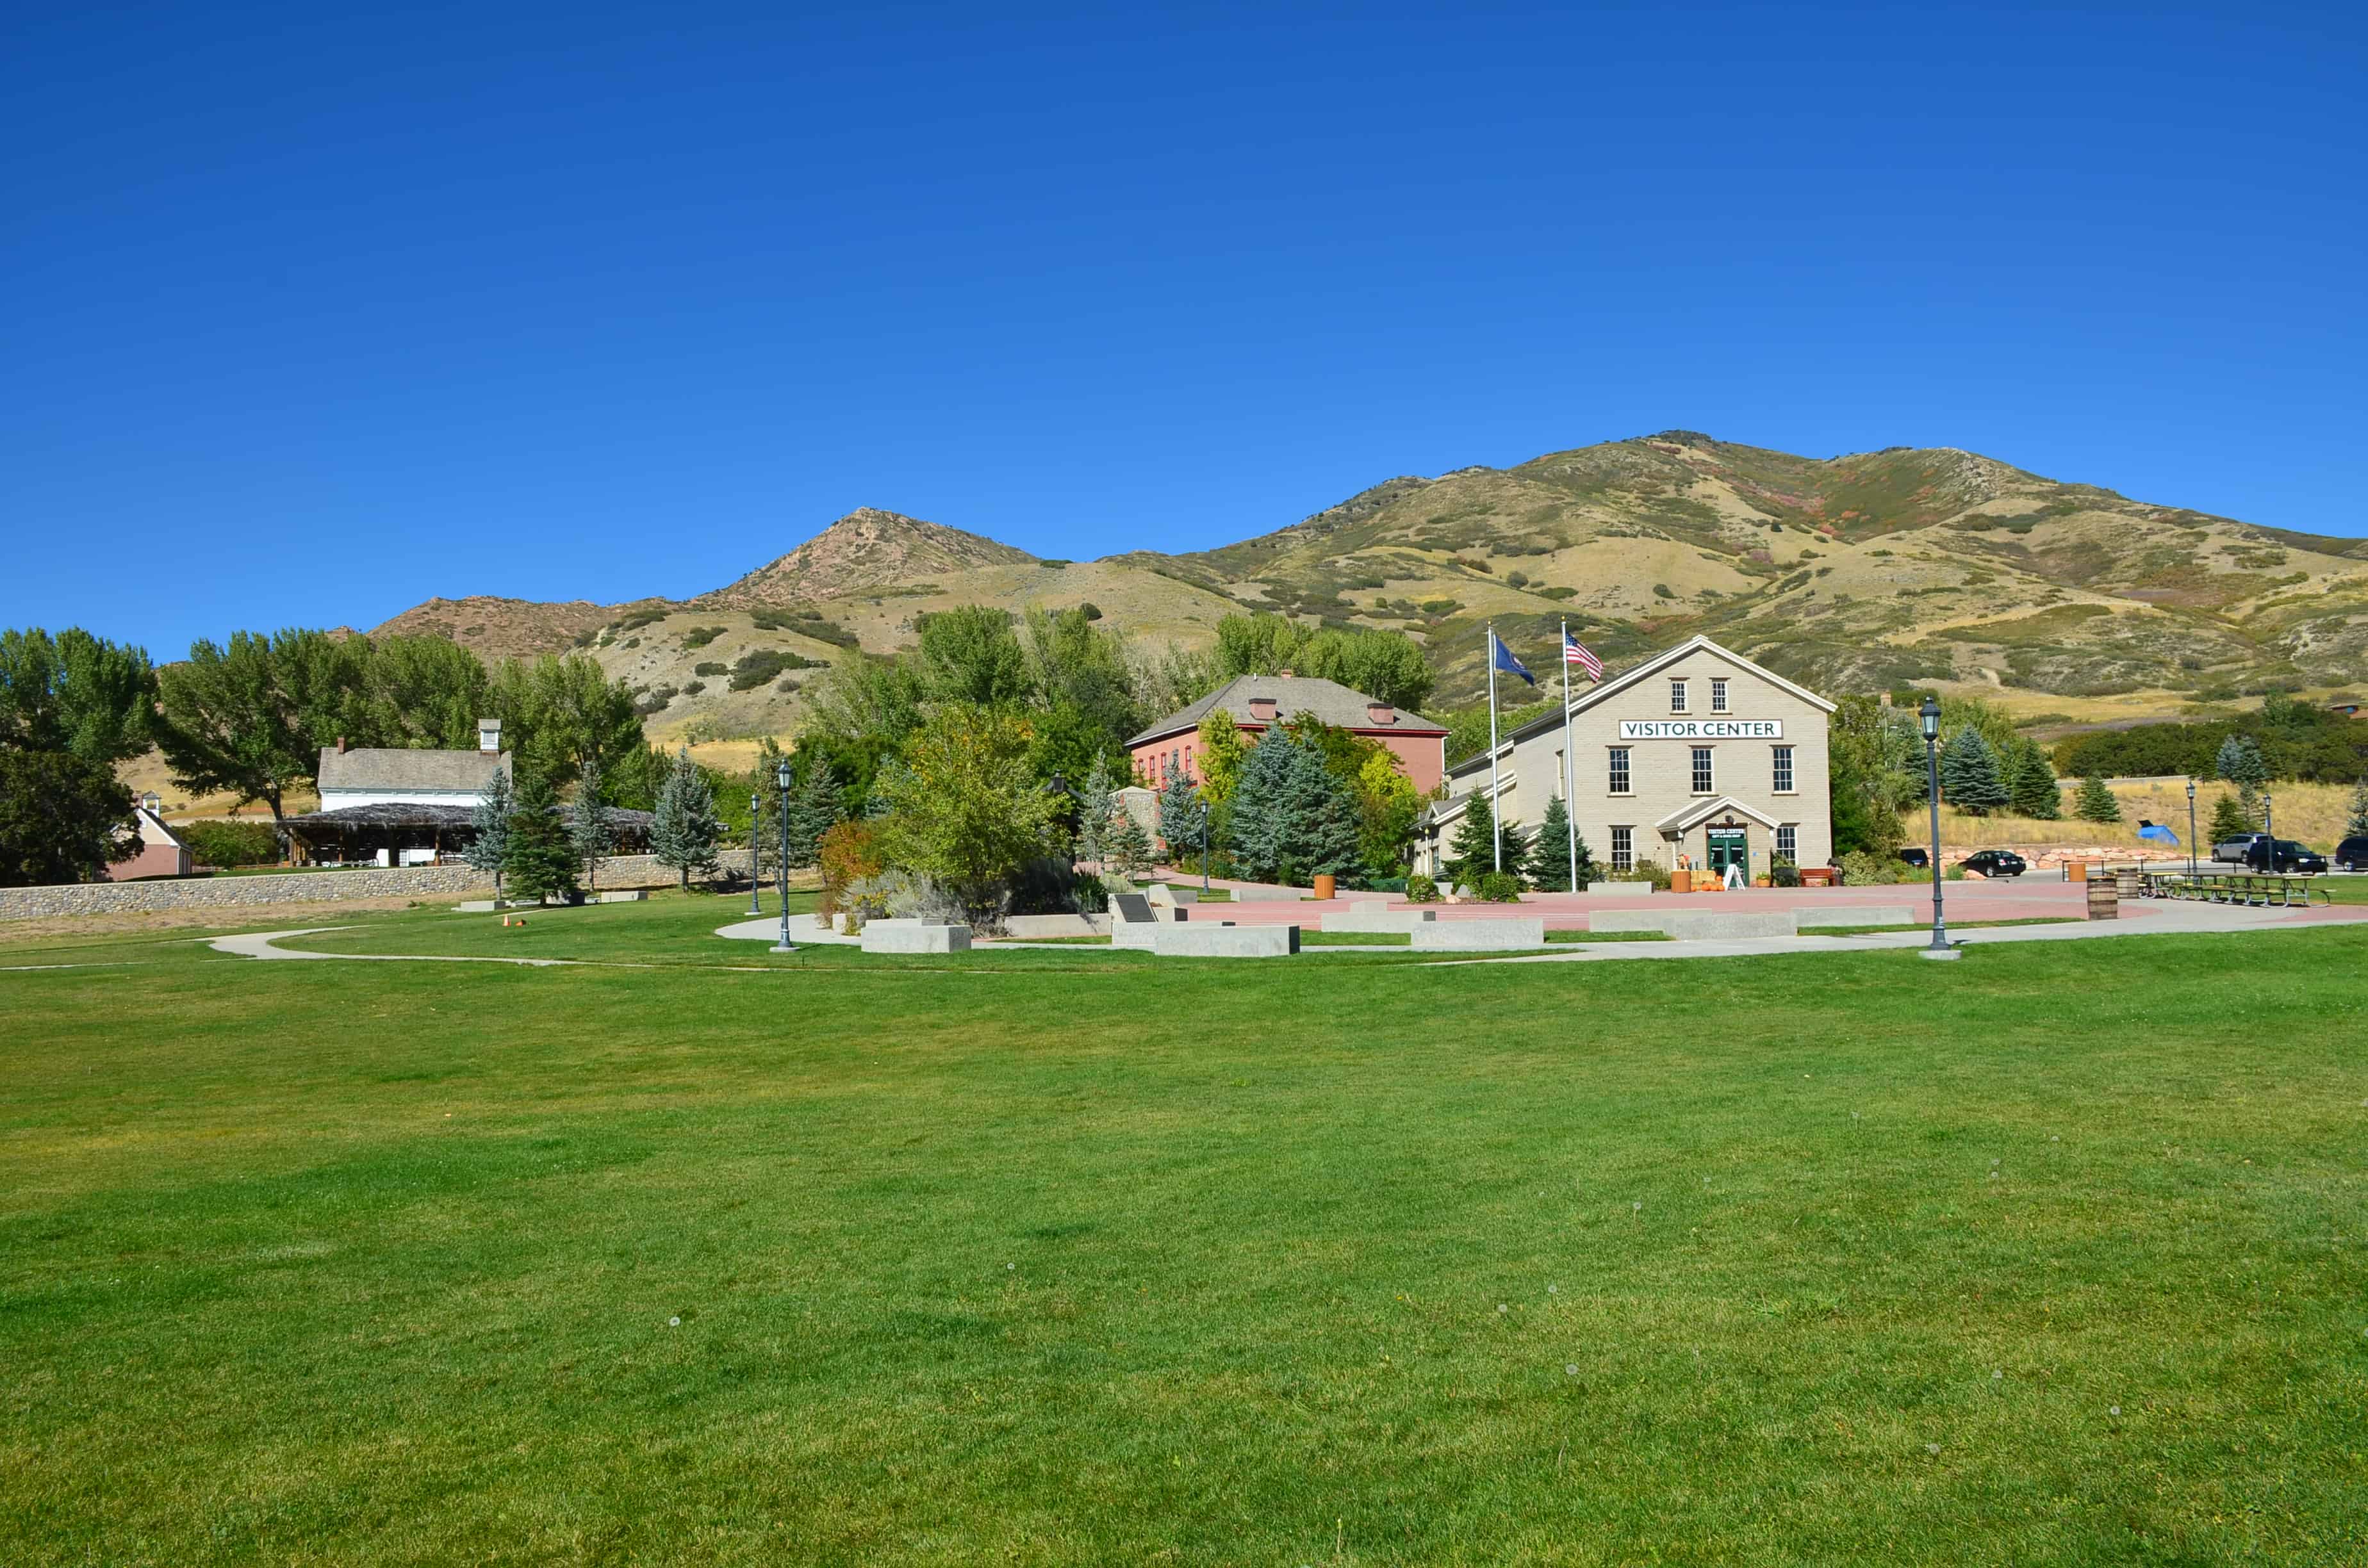 This Is the Place Heritage Park in Salt Lake City, Utah